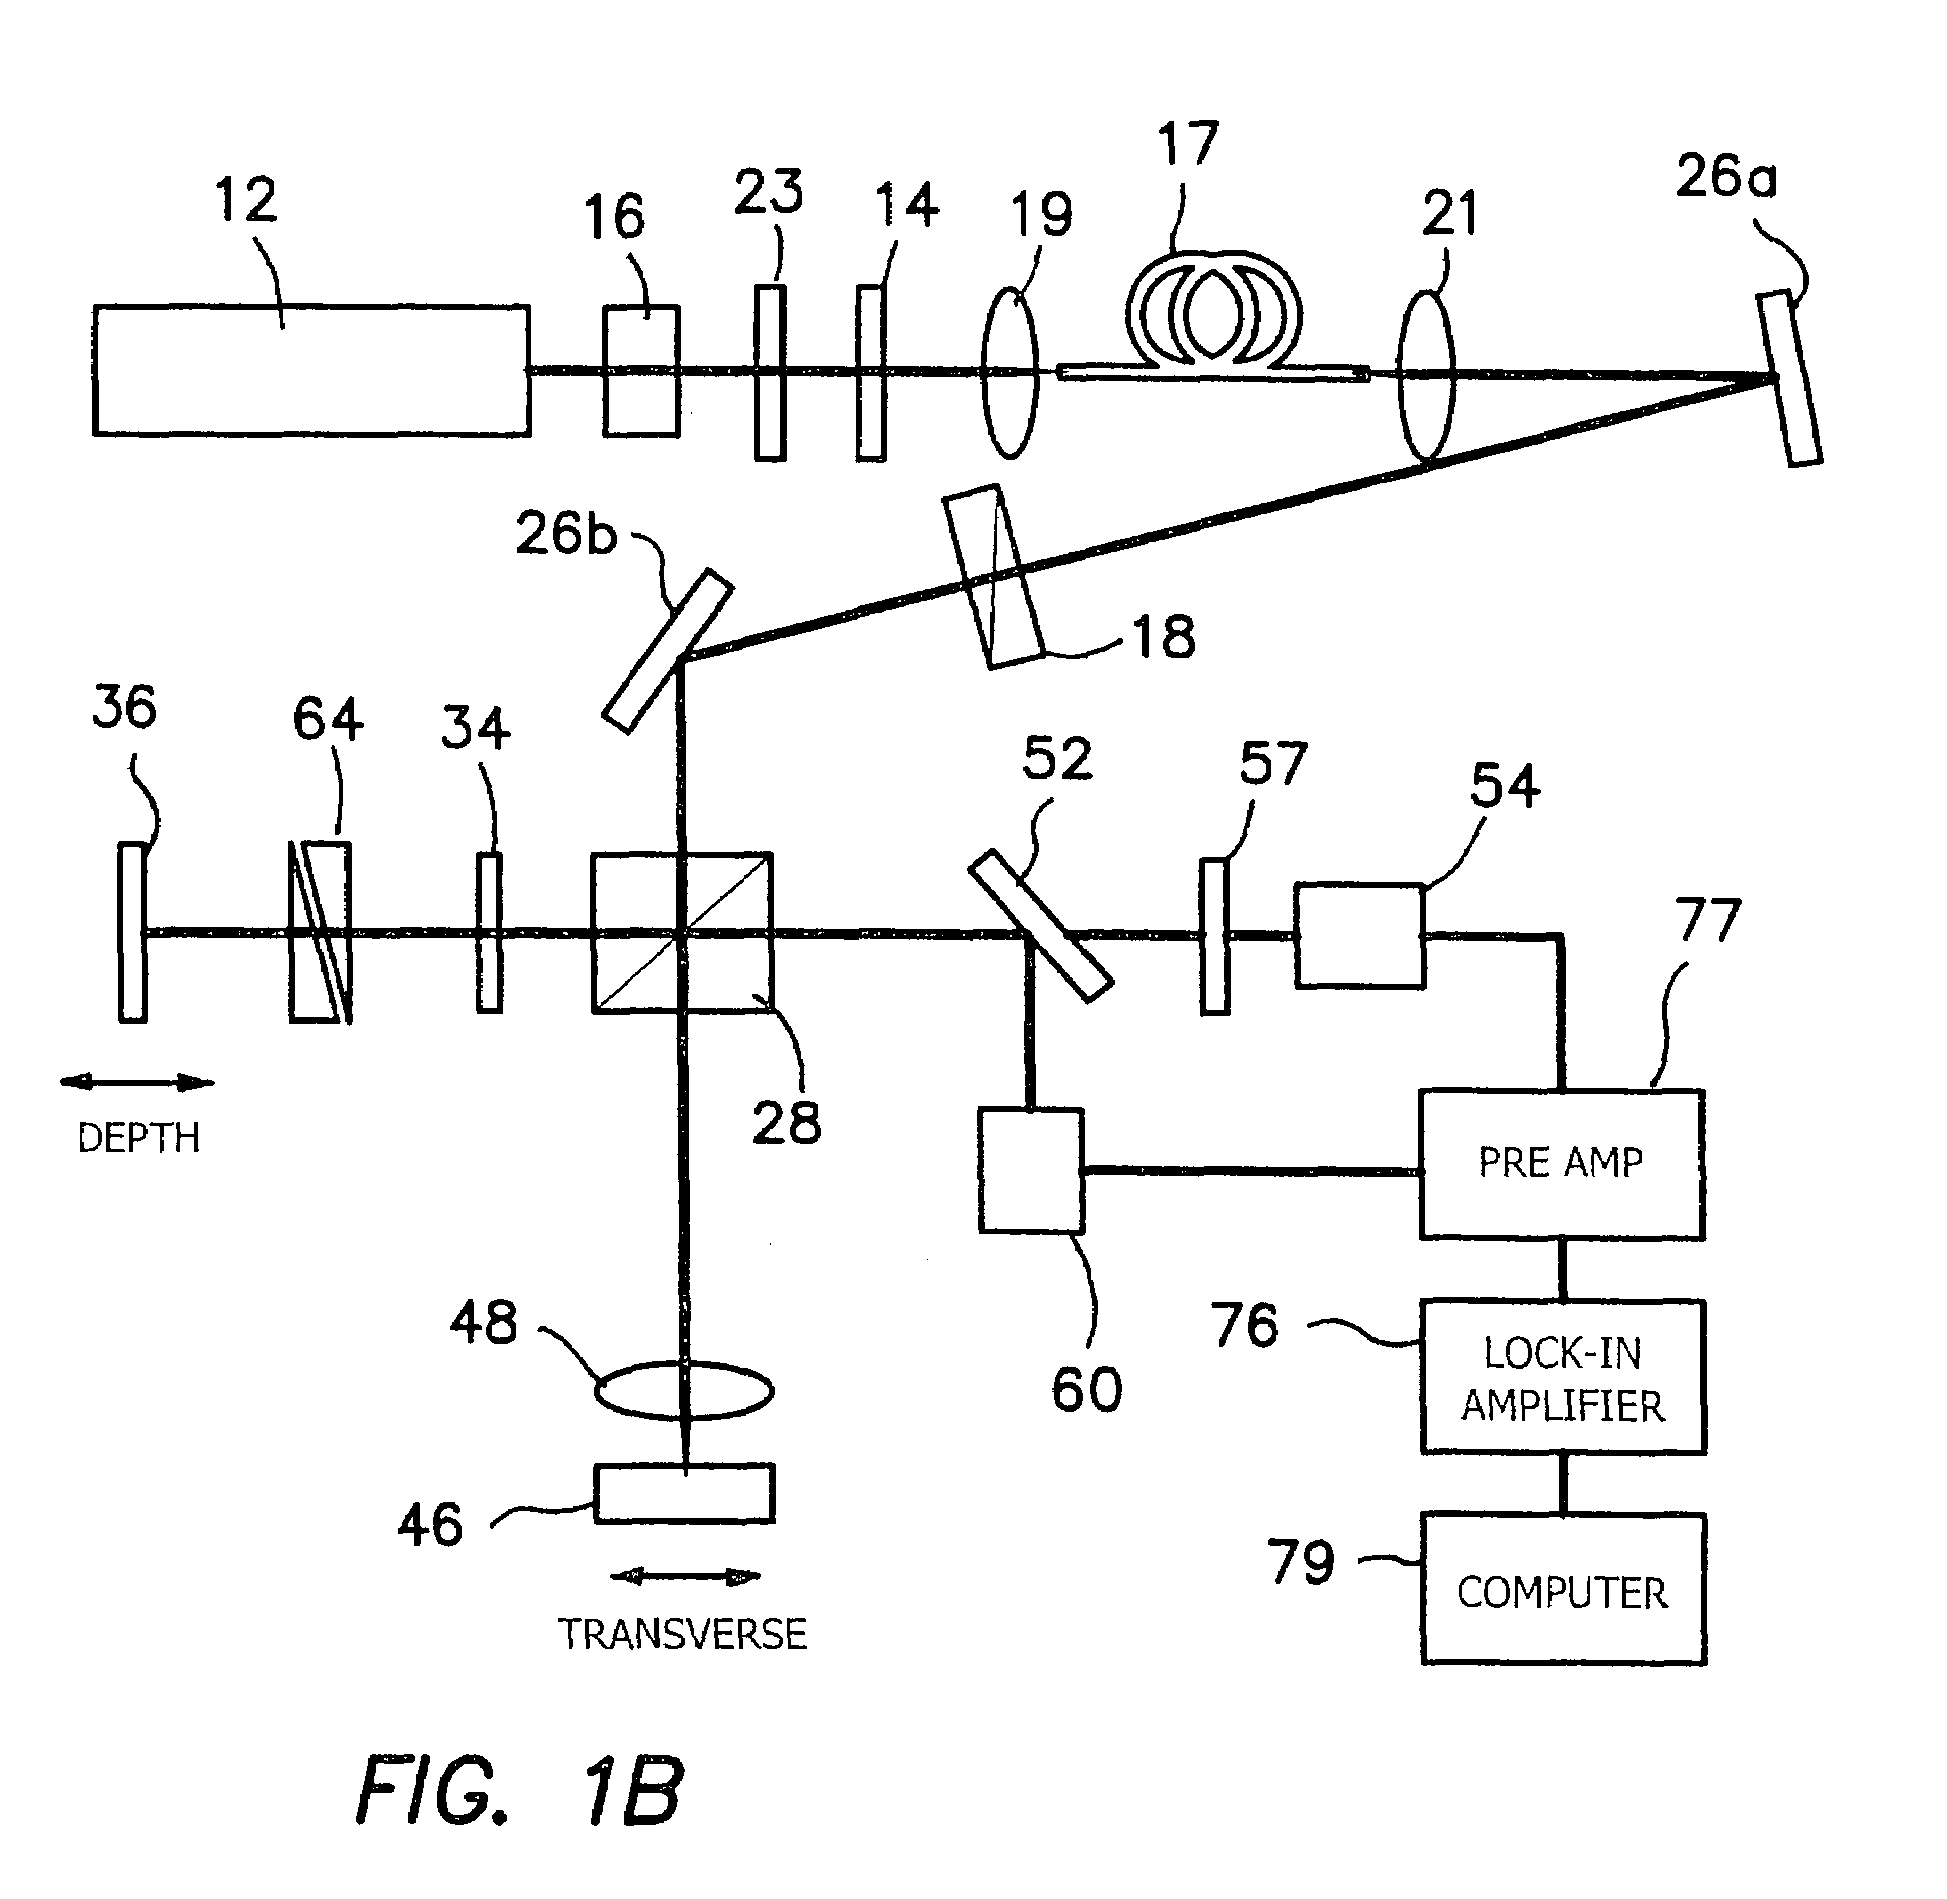 Method and apparatus for performing second harmonic optical coherence tomography